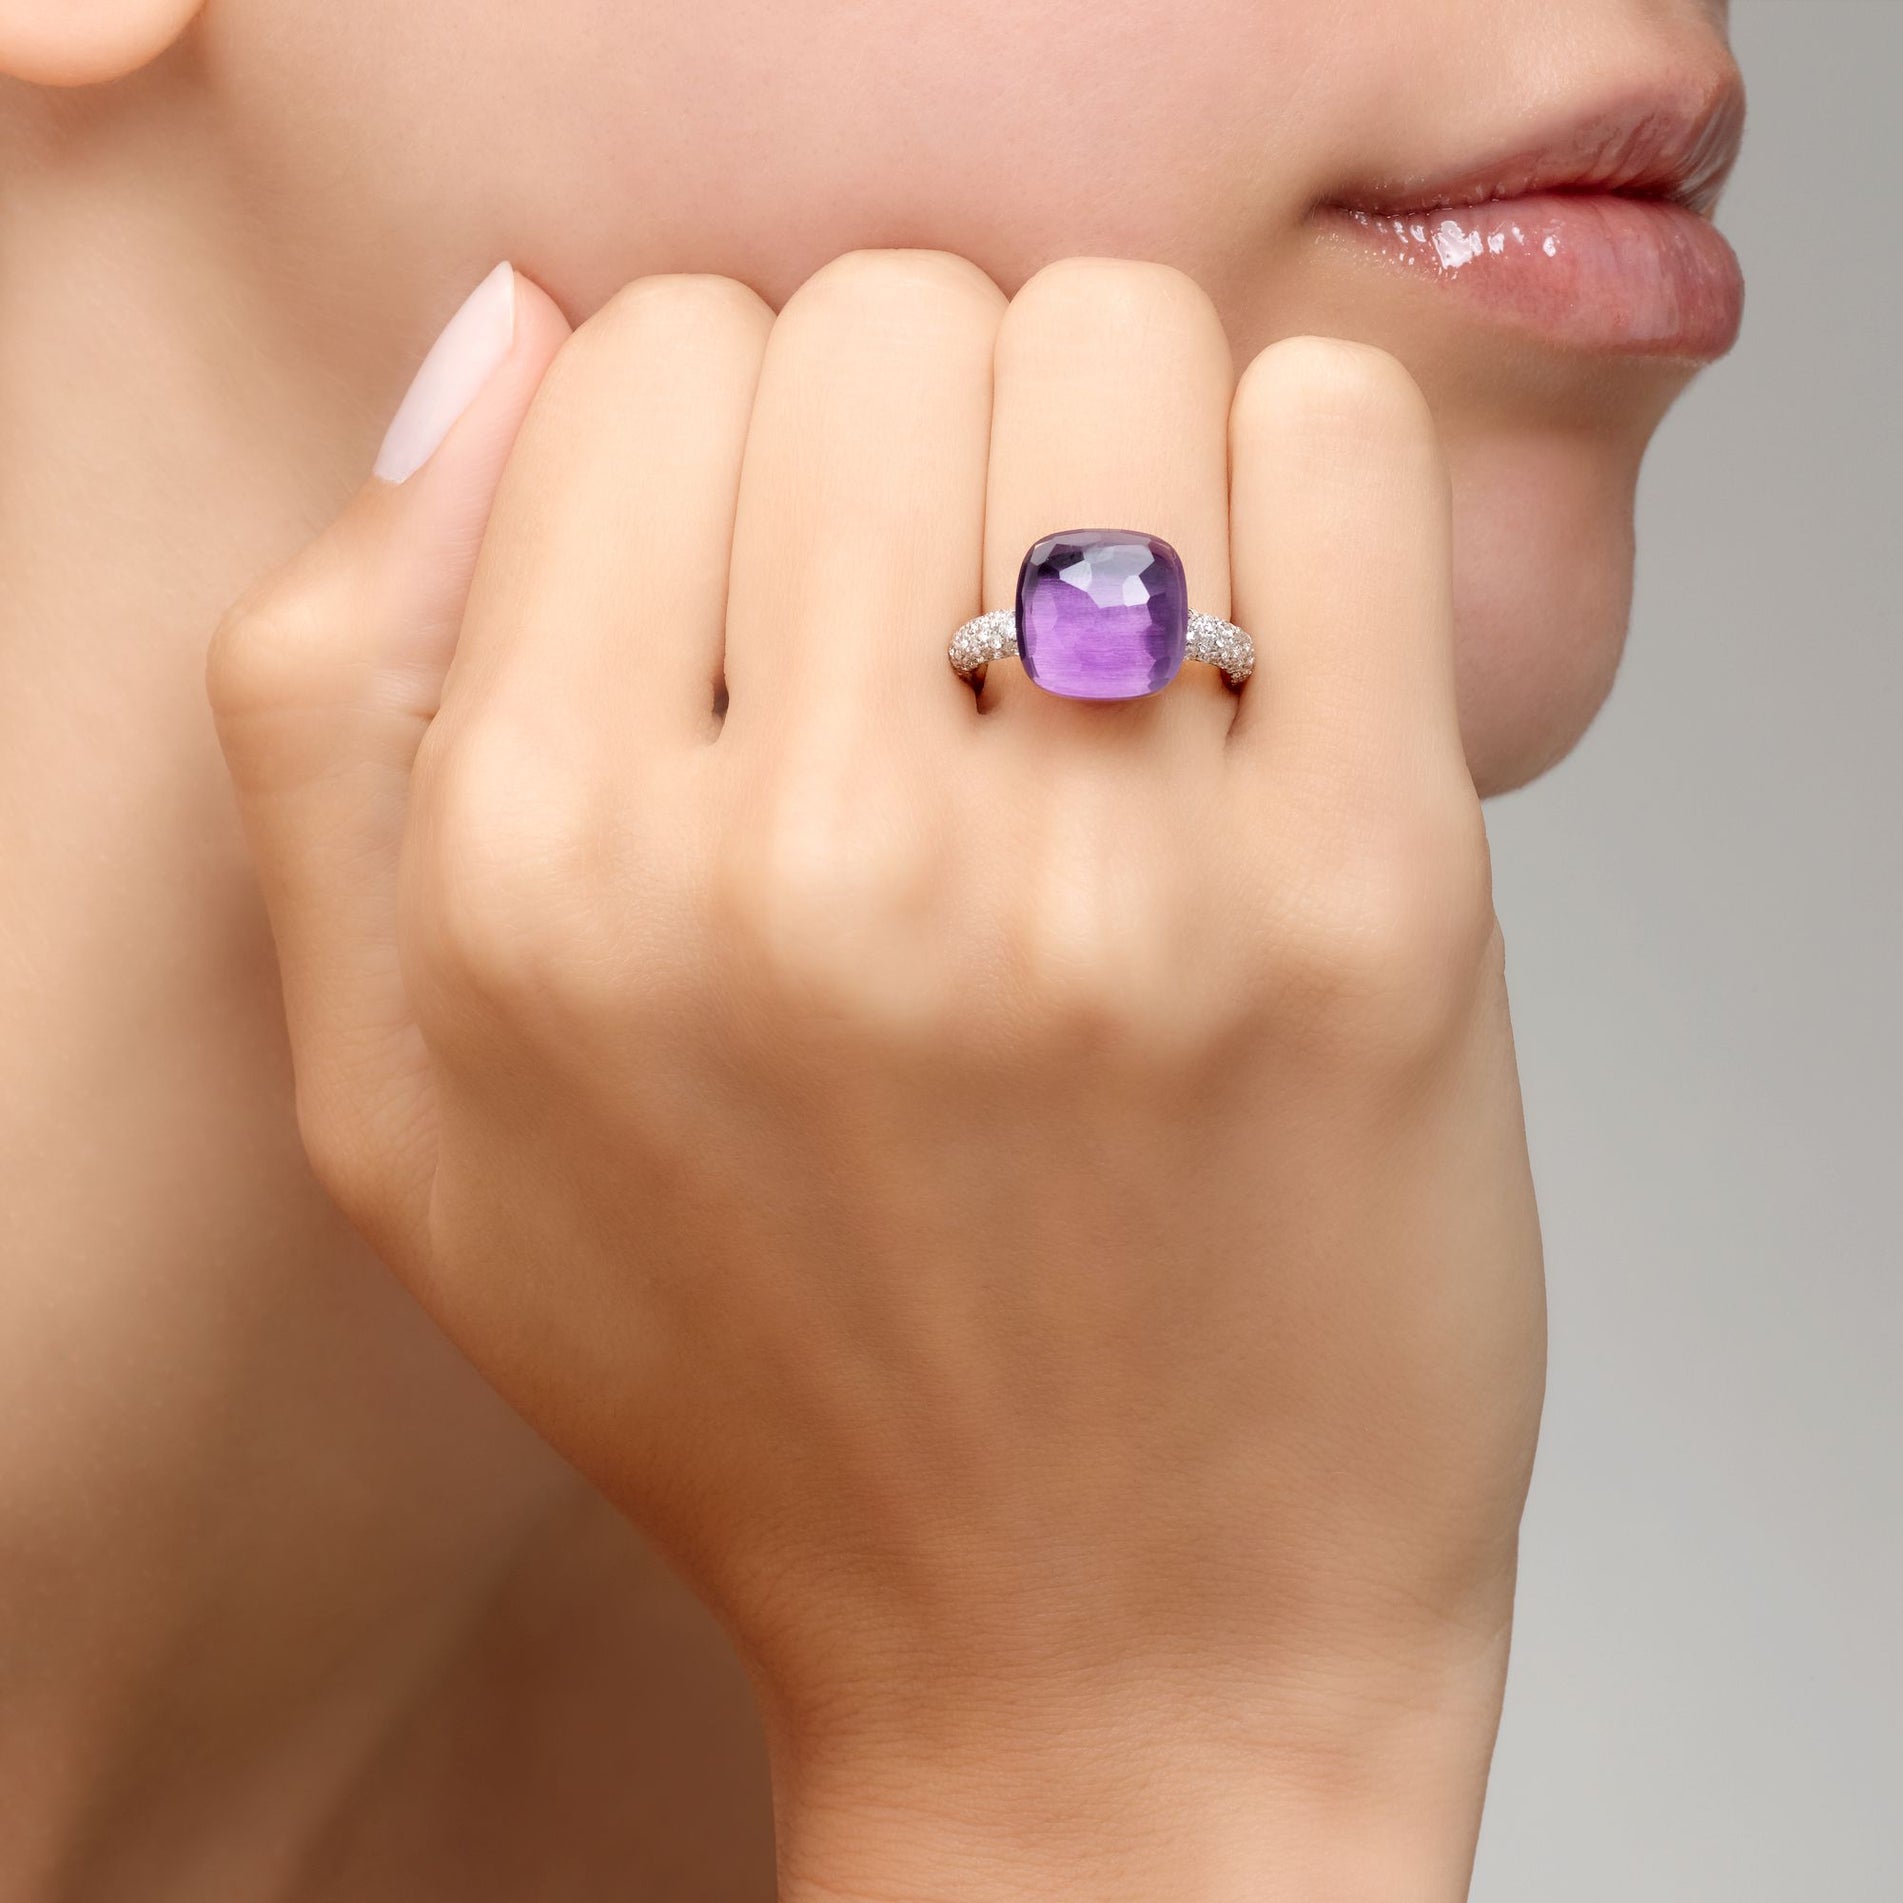 Nudo Maxi Diamond Ring in 18k White Gold and Rose Gold with Amethyst and Diamonds - Orsini Jewellers NZ